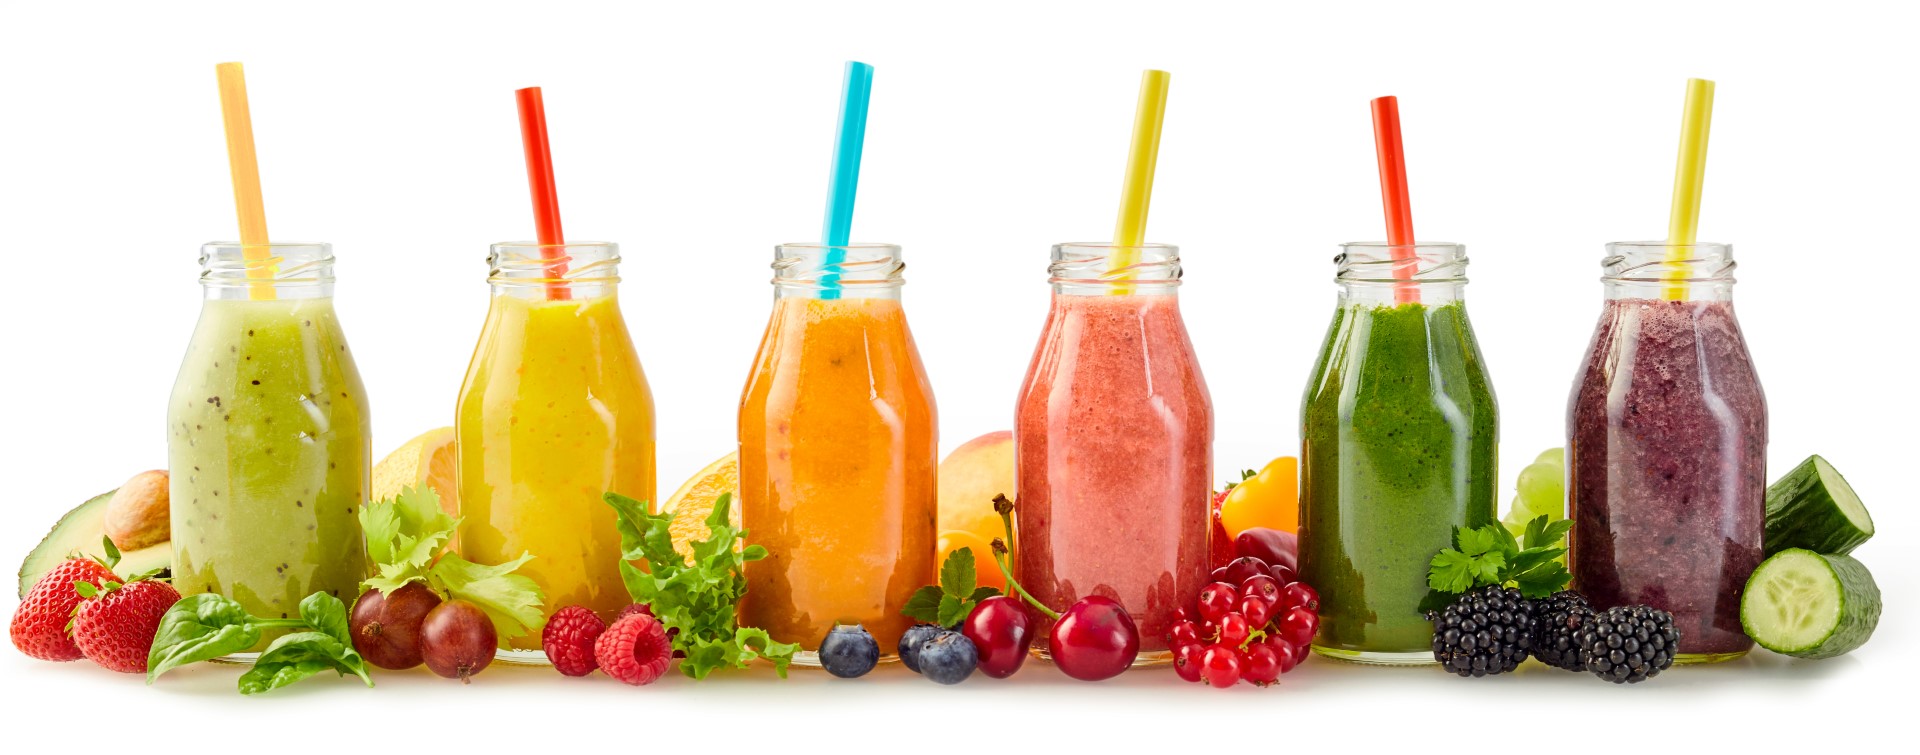 Several smoothies of different varieties placed decoratively on a table